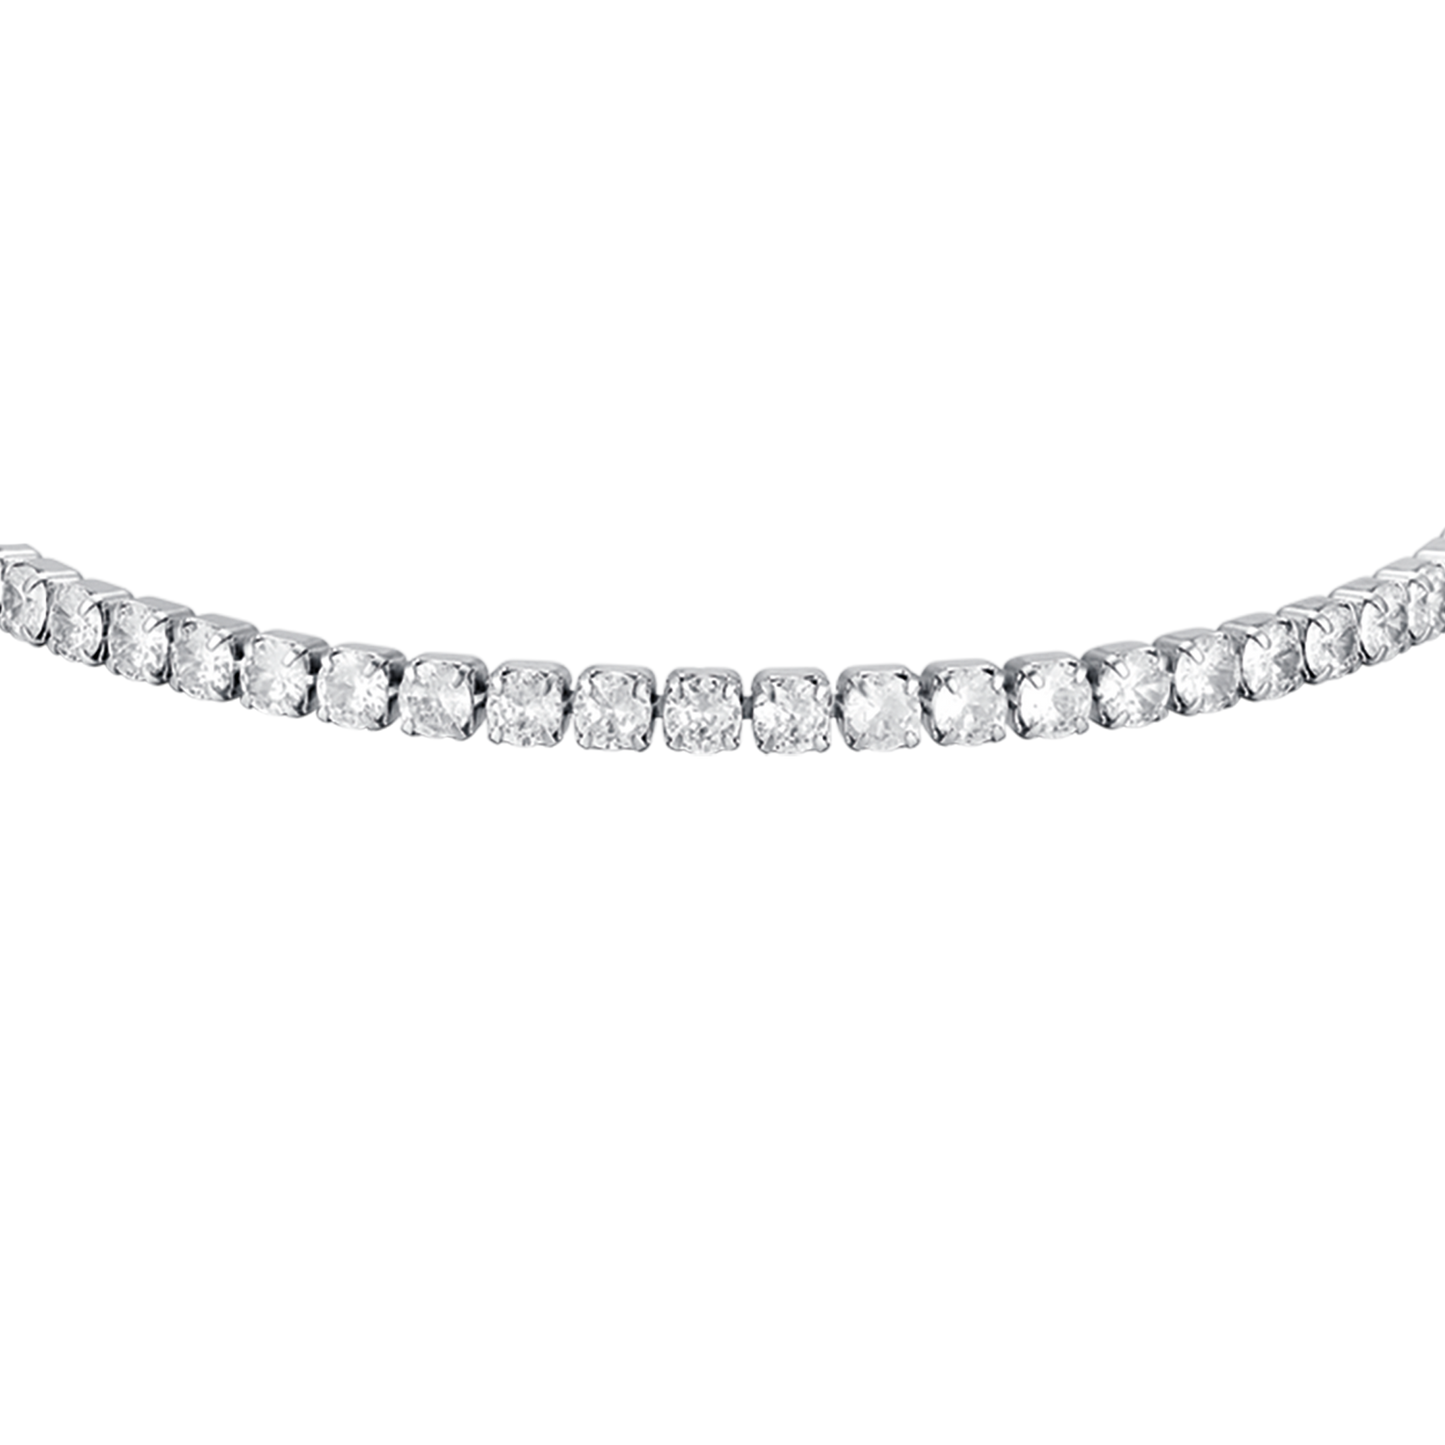 MAN'S TENNIS BRACELET IN STEEL WITH WHITE CRYSTALS Luca Barra